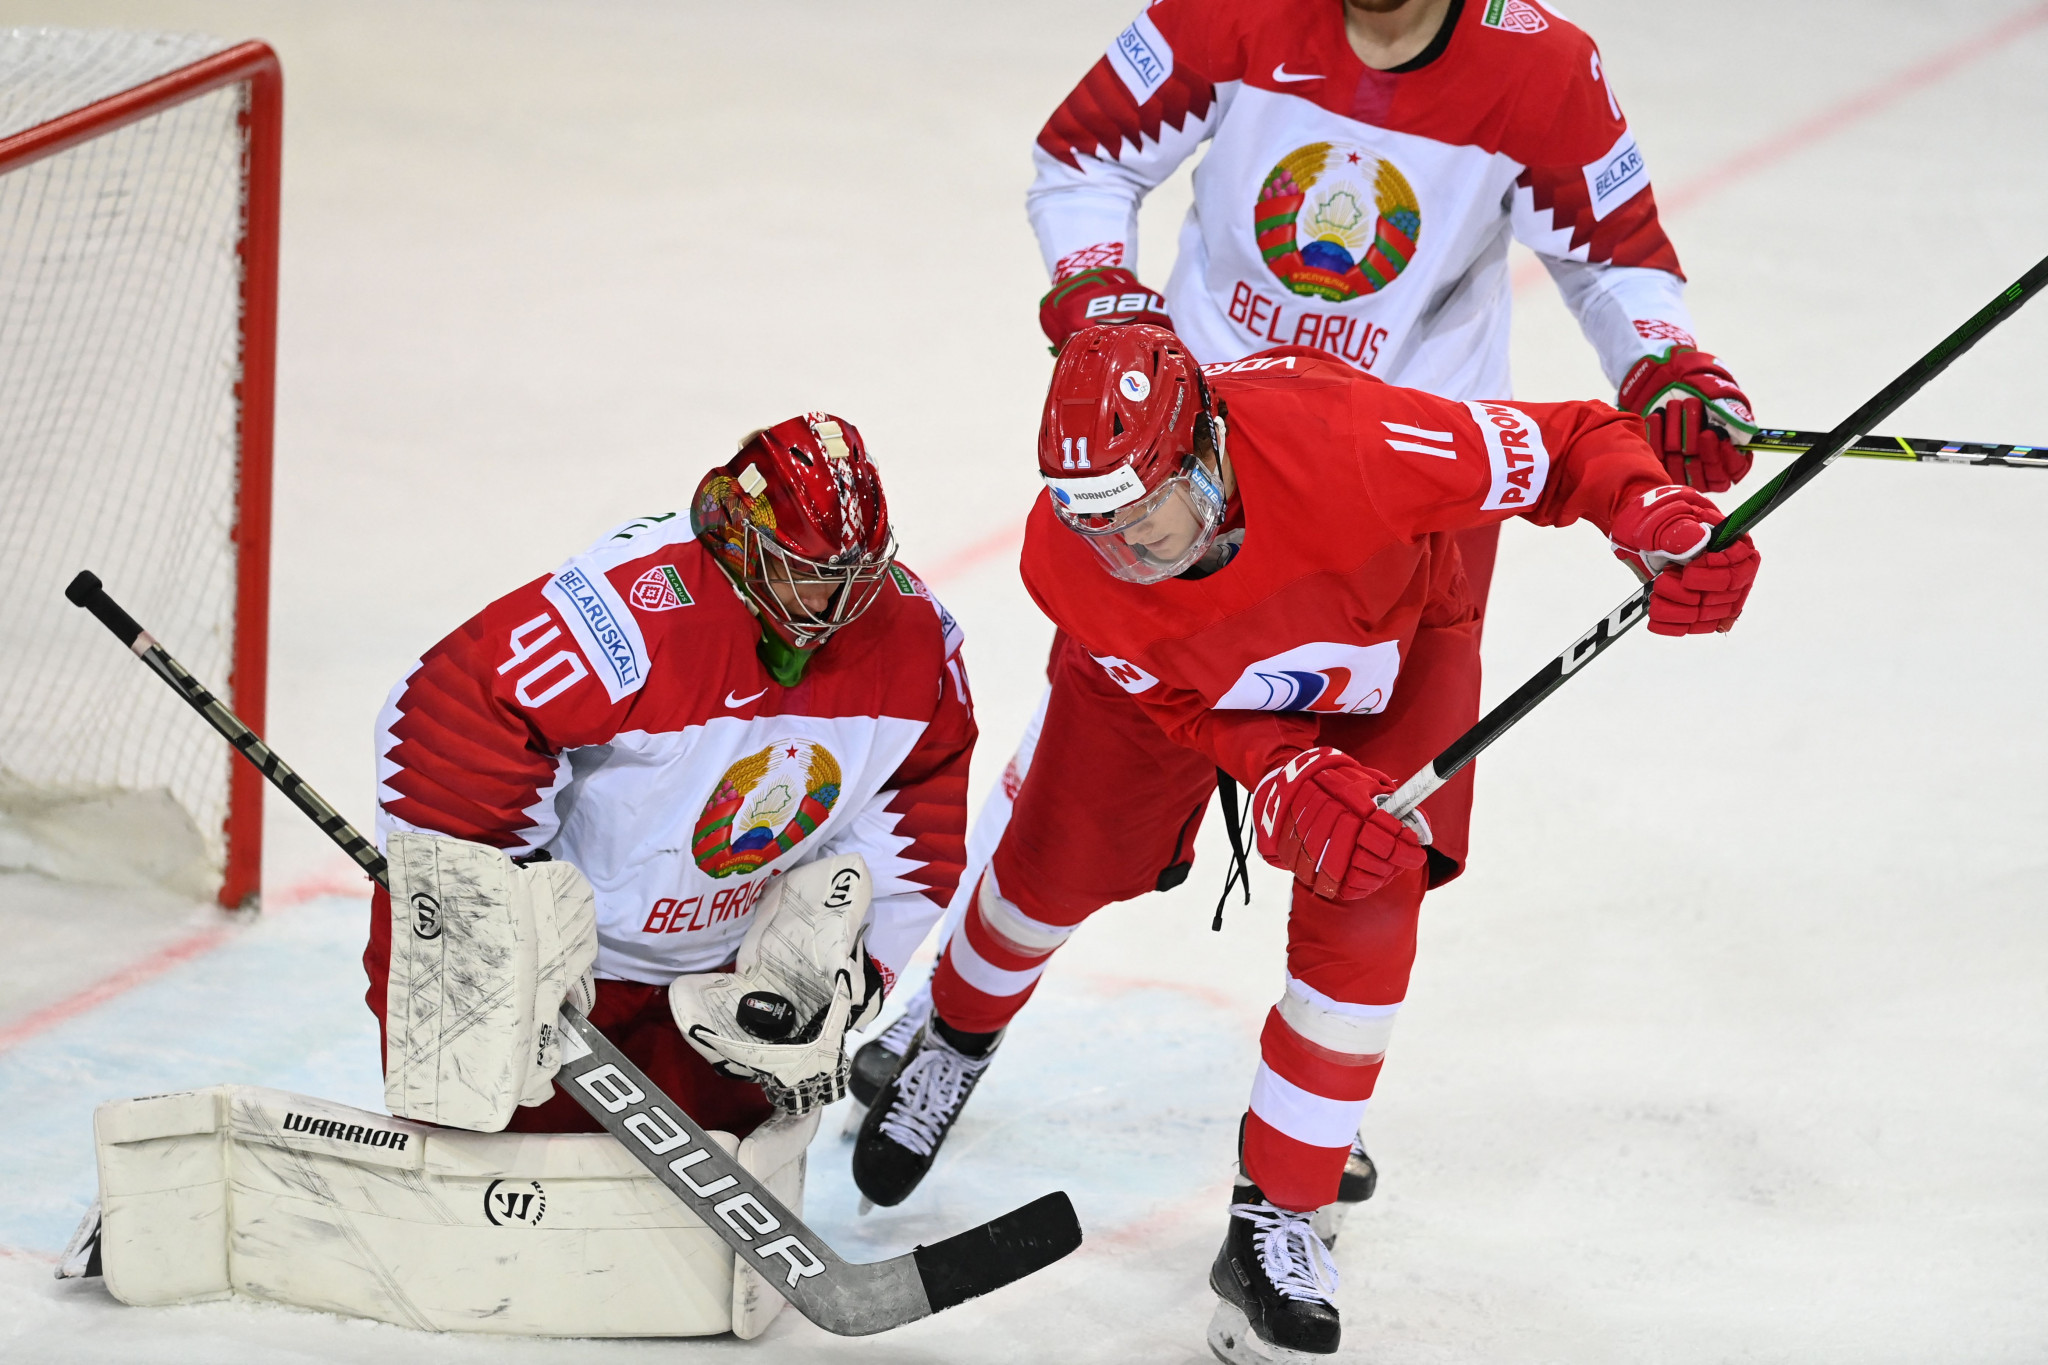 Players from Belarus and Russia are currently banned from IIHF competitions ©Getty Images